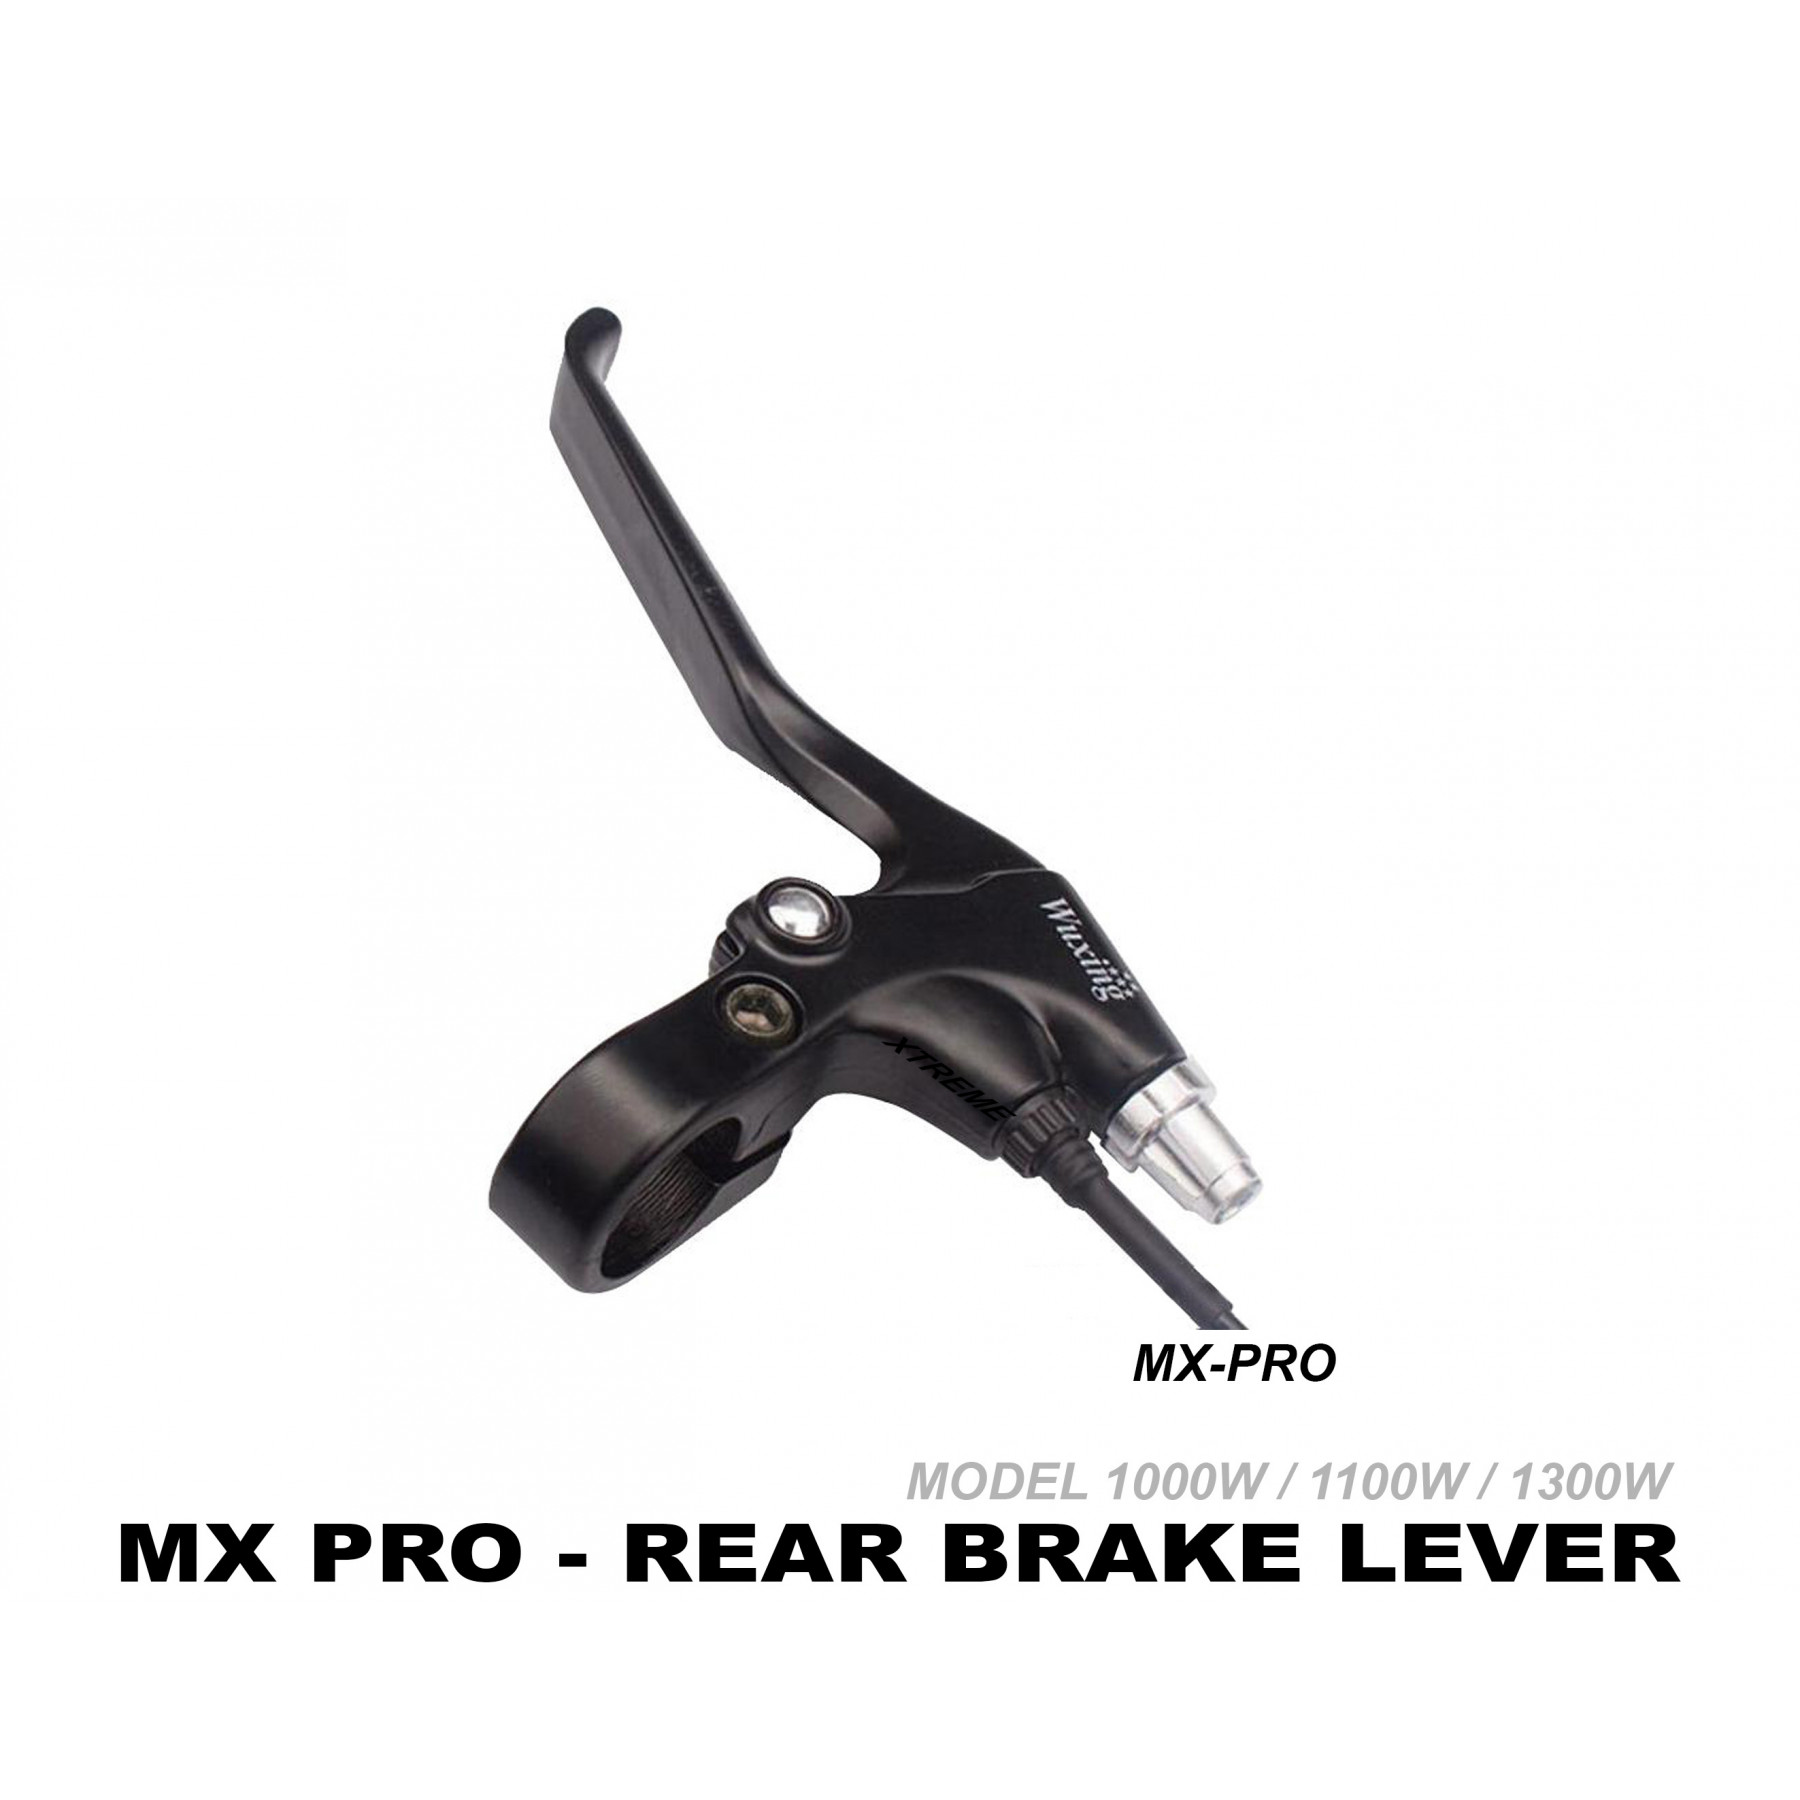 XTREME ELECTRIC XTM MX-PRO 36V REPLACEMENT REAR BRAKE LEVER